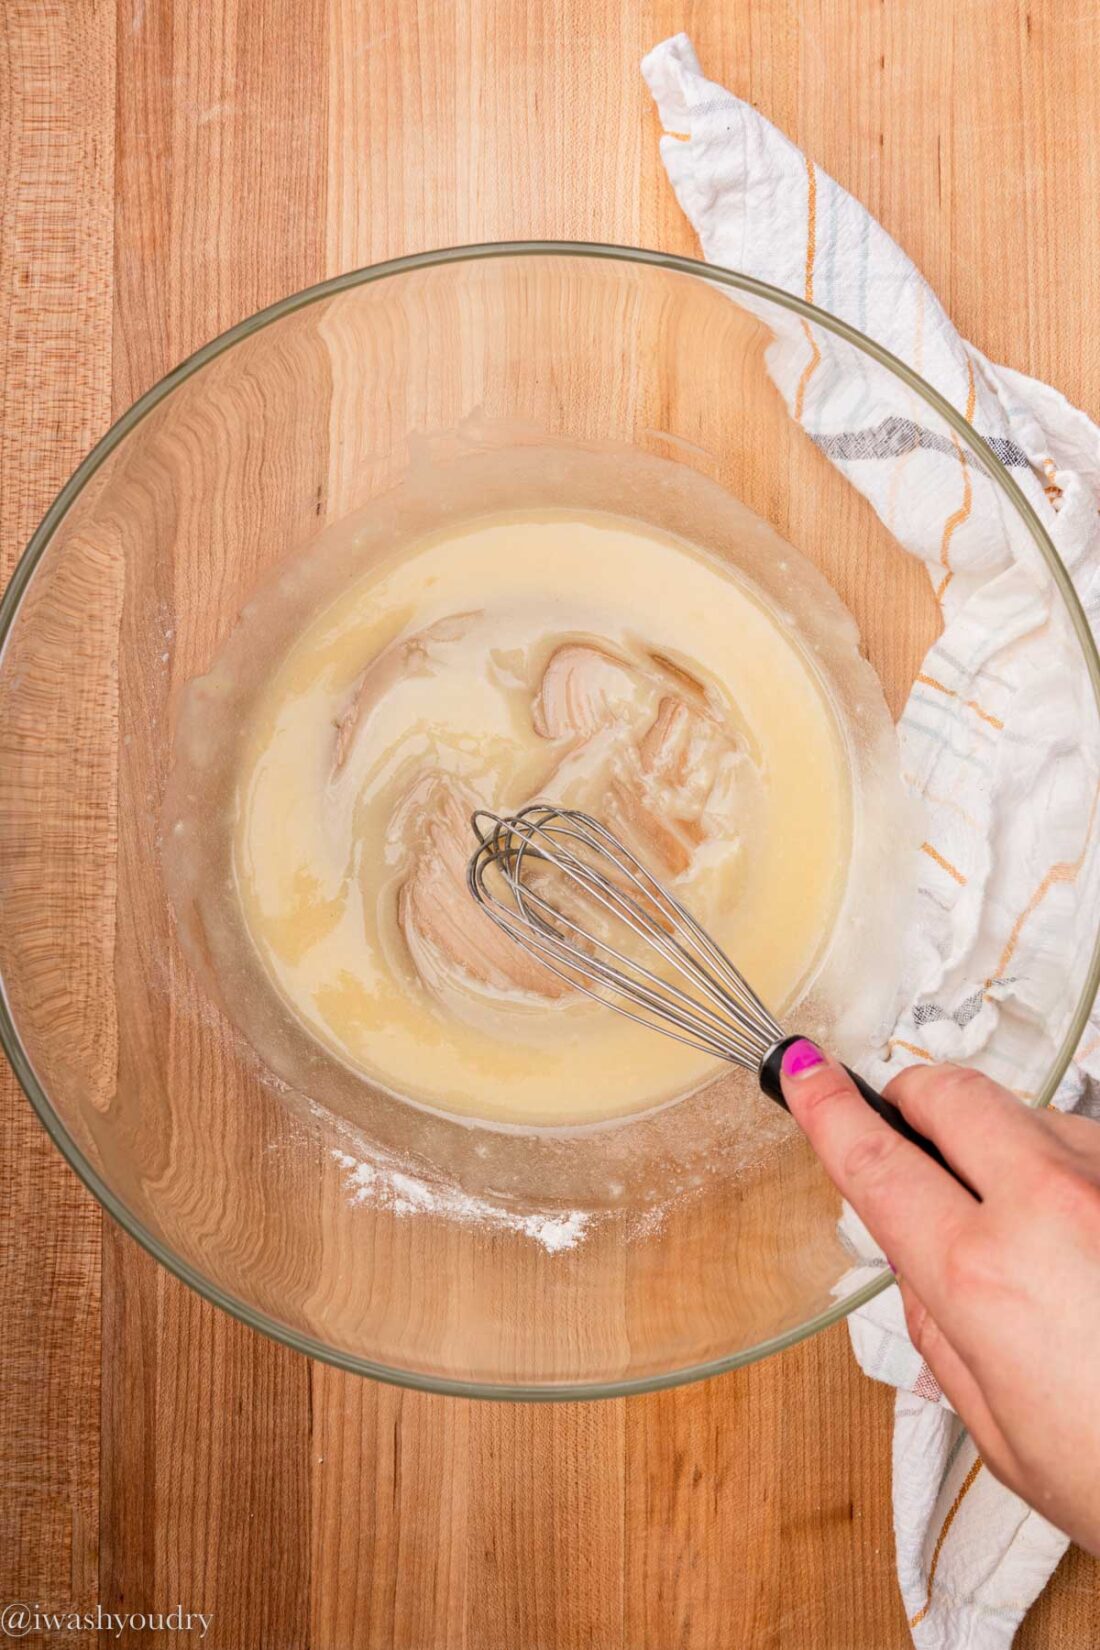 Whisk together flour and butter in a glass bowl.